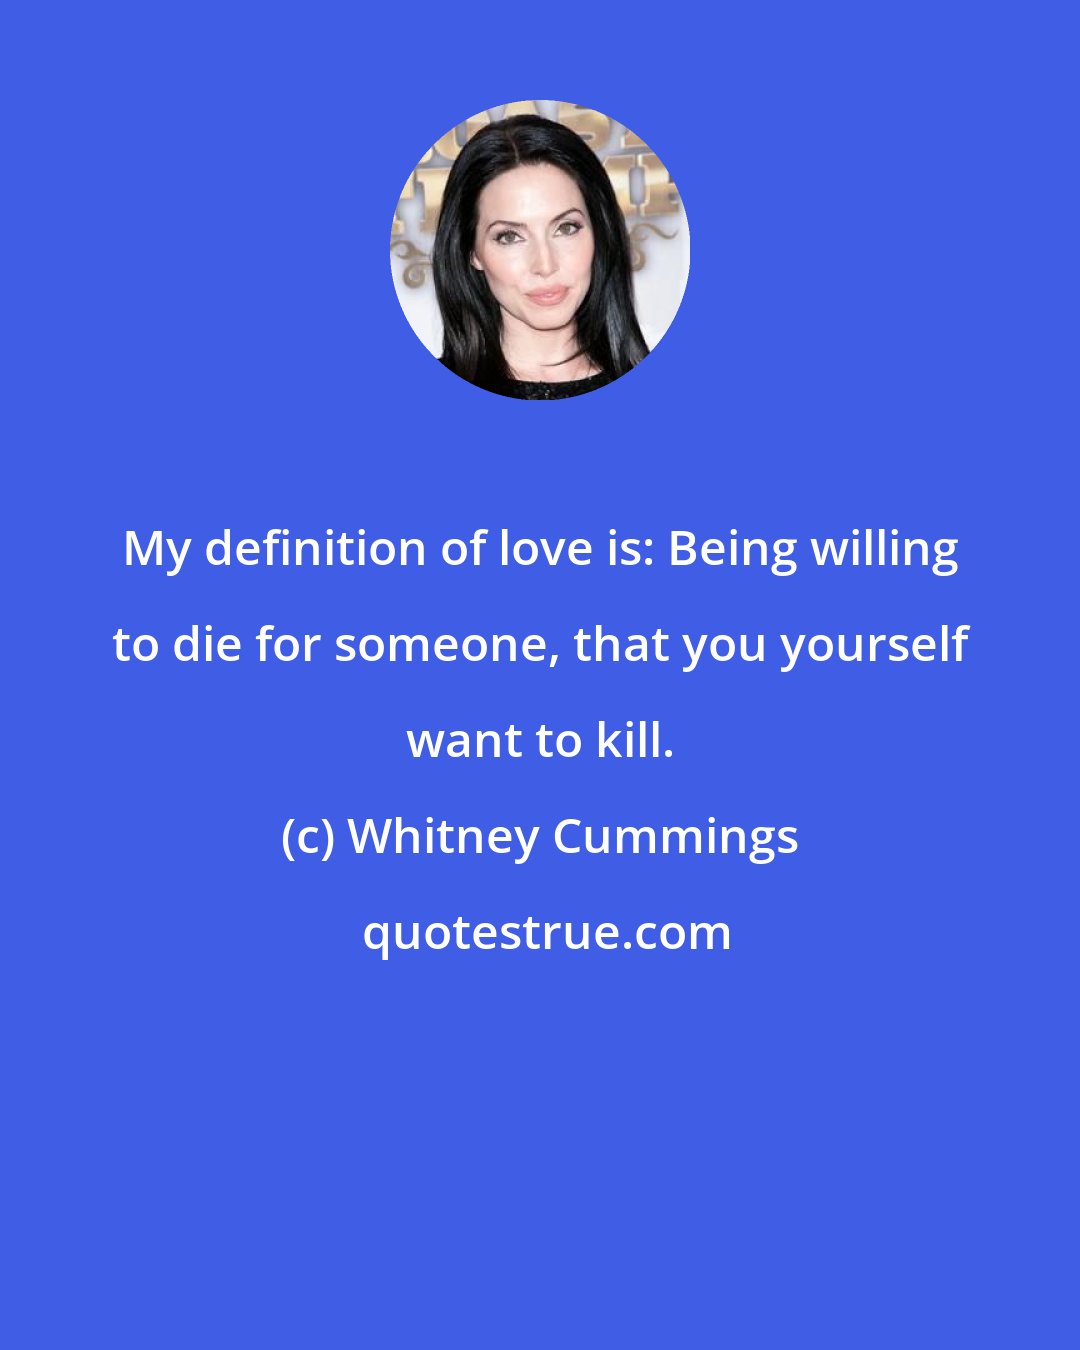 Whitney Cummings: My definition of love is: Being willing to die for someone, that you yourself want to kill.